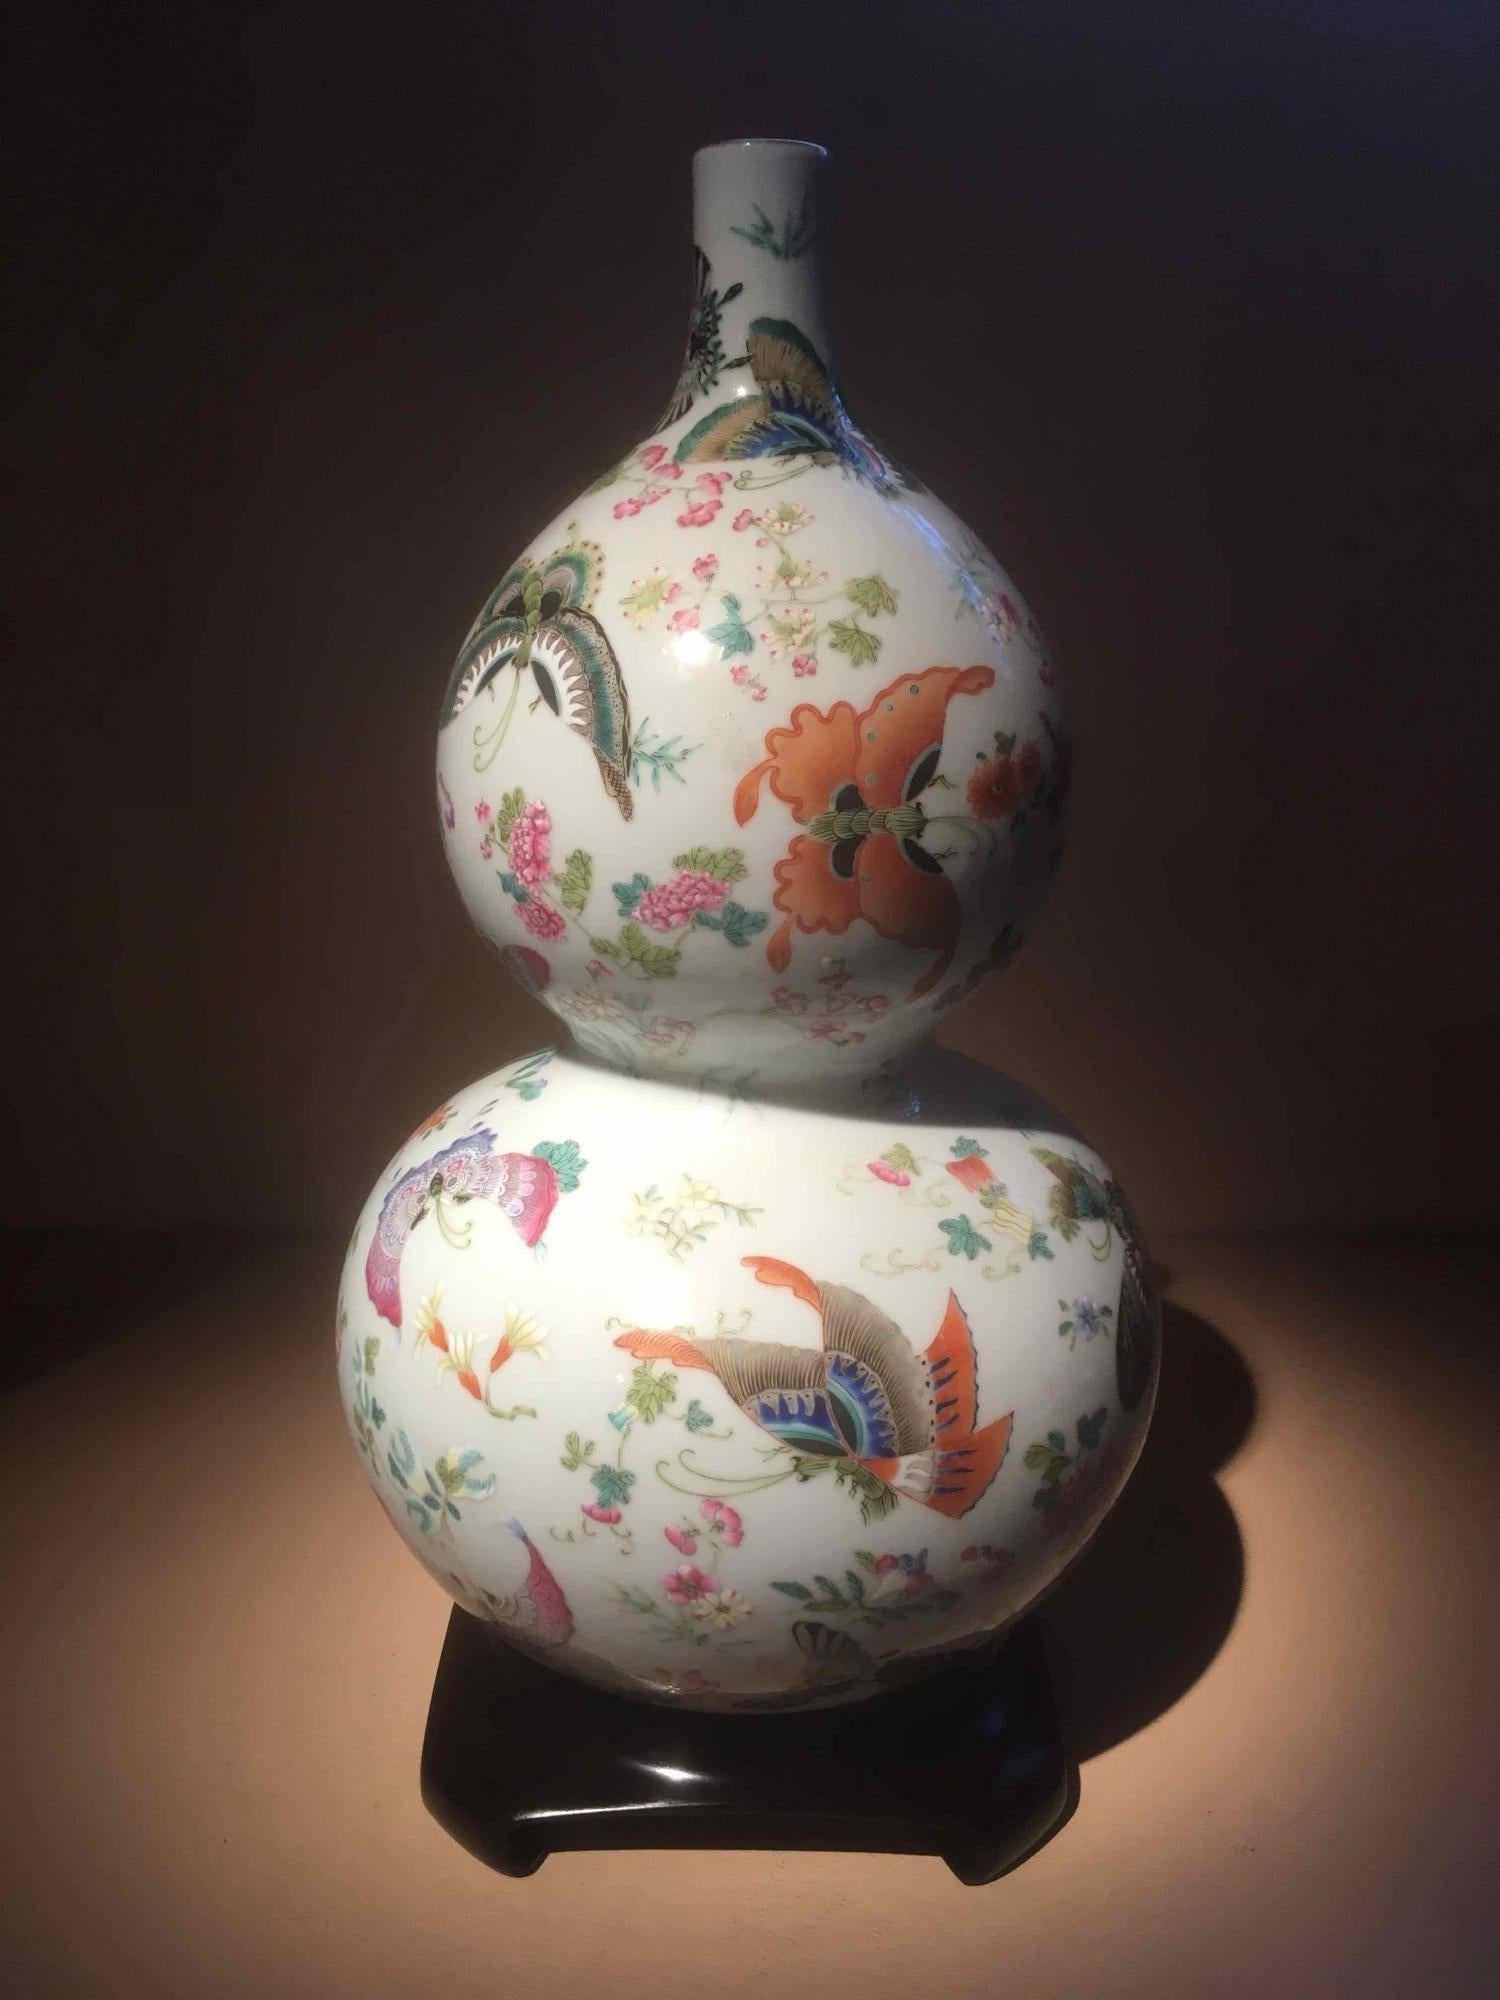 Lovely butterfly motif vase with multiple colors. 
Yuan Cheng (circa 1723 -1735) mark on the bottom
Vase is dated republic period circa 1912-1949
Gourd-Shaped
Material: Ceramic glazed
Origin: China
Age: Republic period, circa 1912-1949
Size: